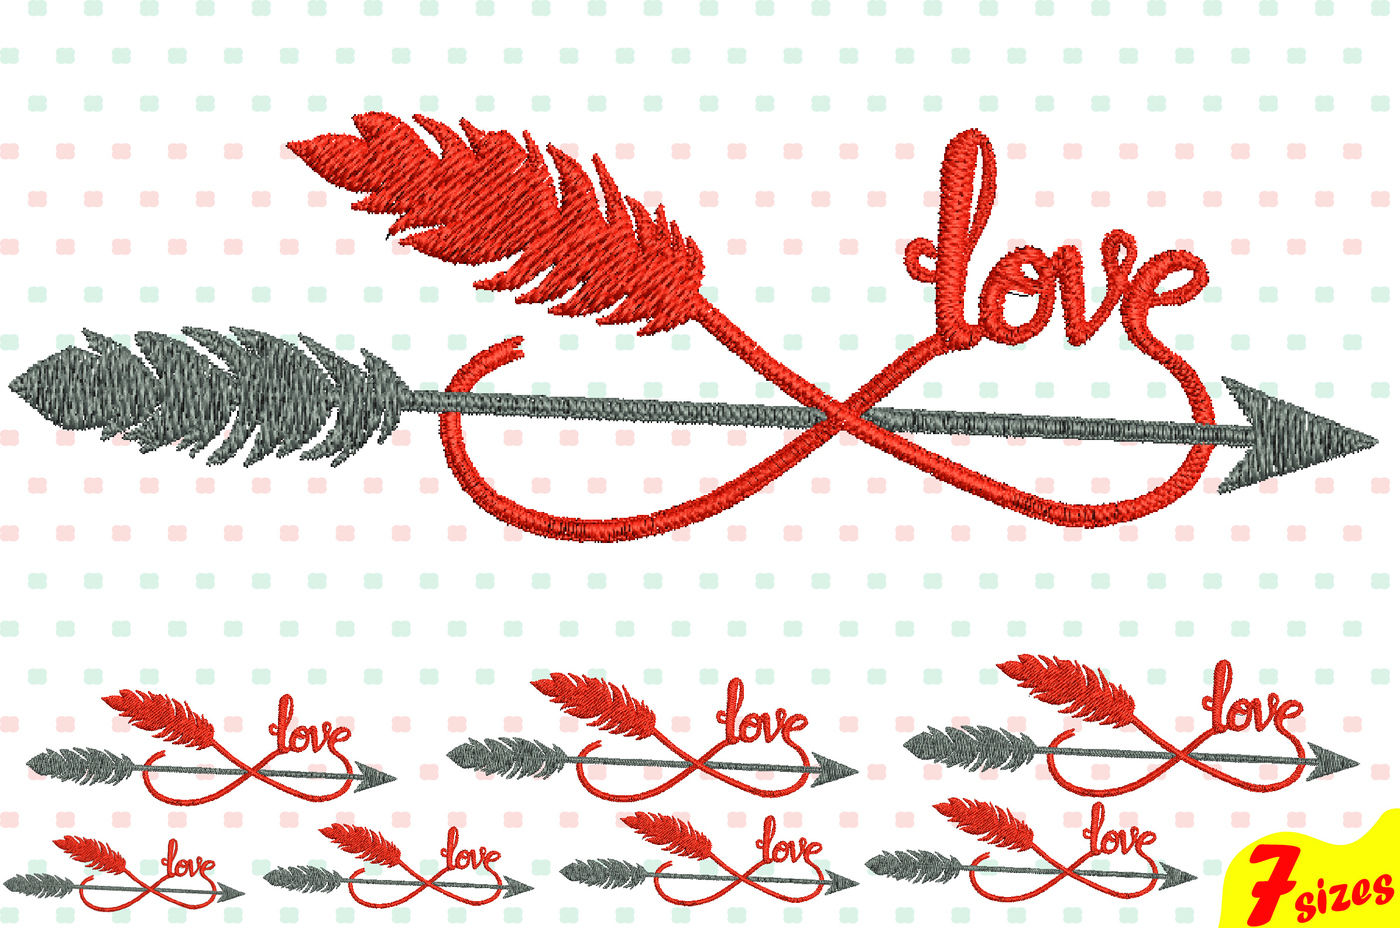 Valentin's Day Machine Embroidery Design  Little Romeo Applique Embroidery Saying   4x4 5x7 6x10 hoop Instant Download